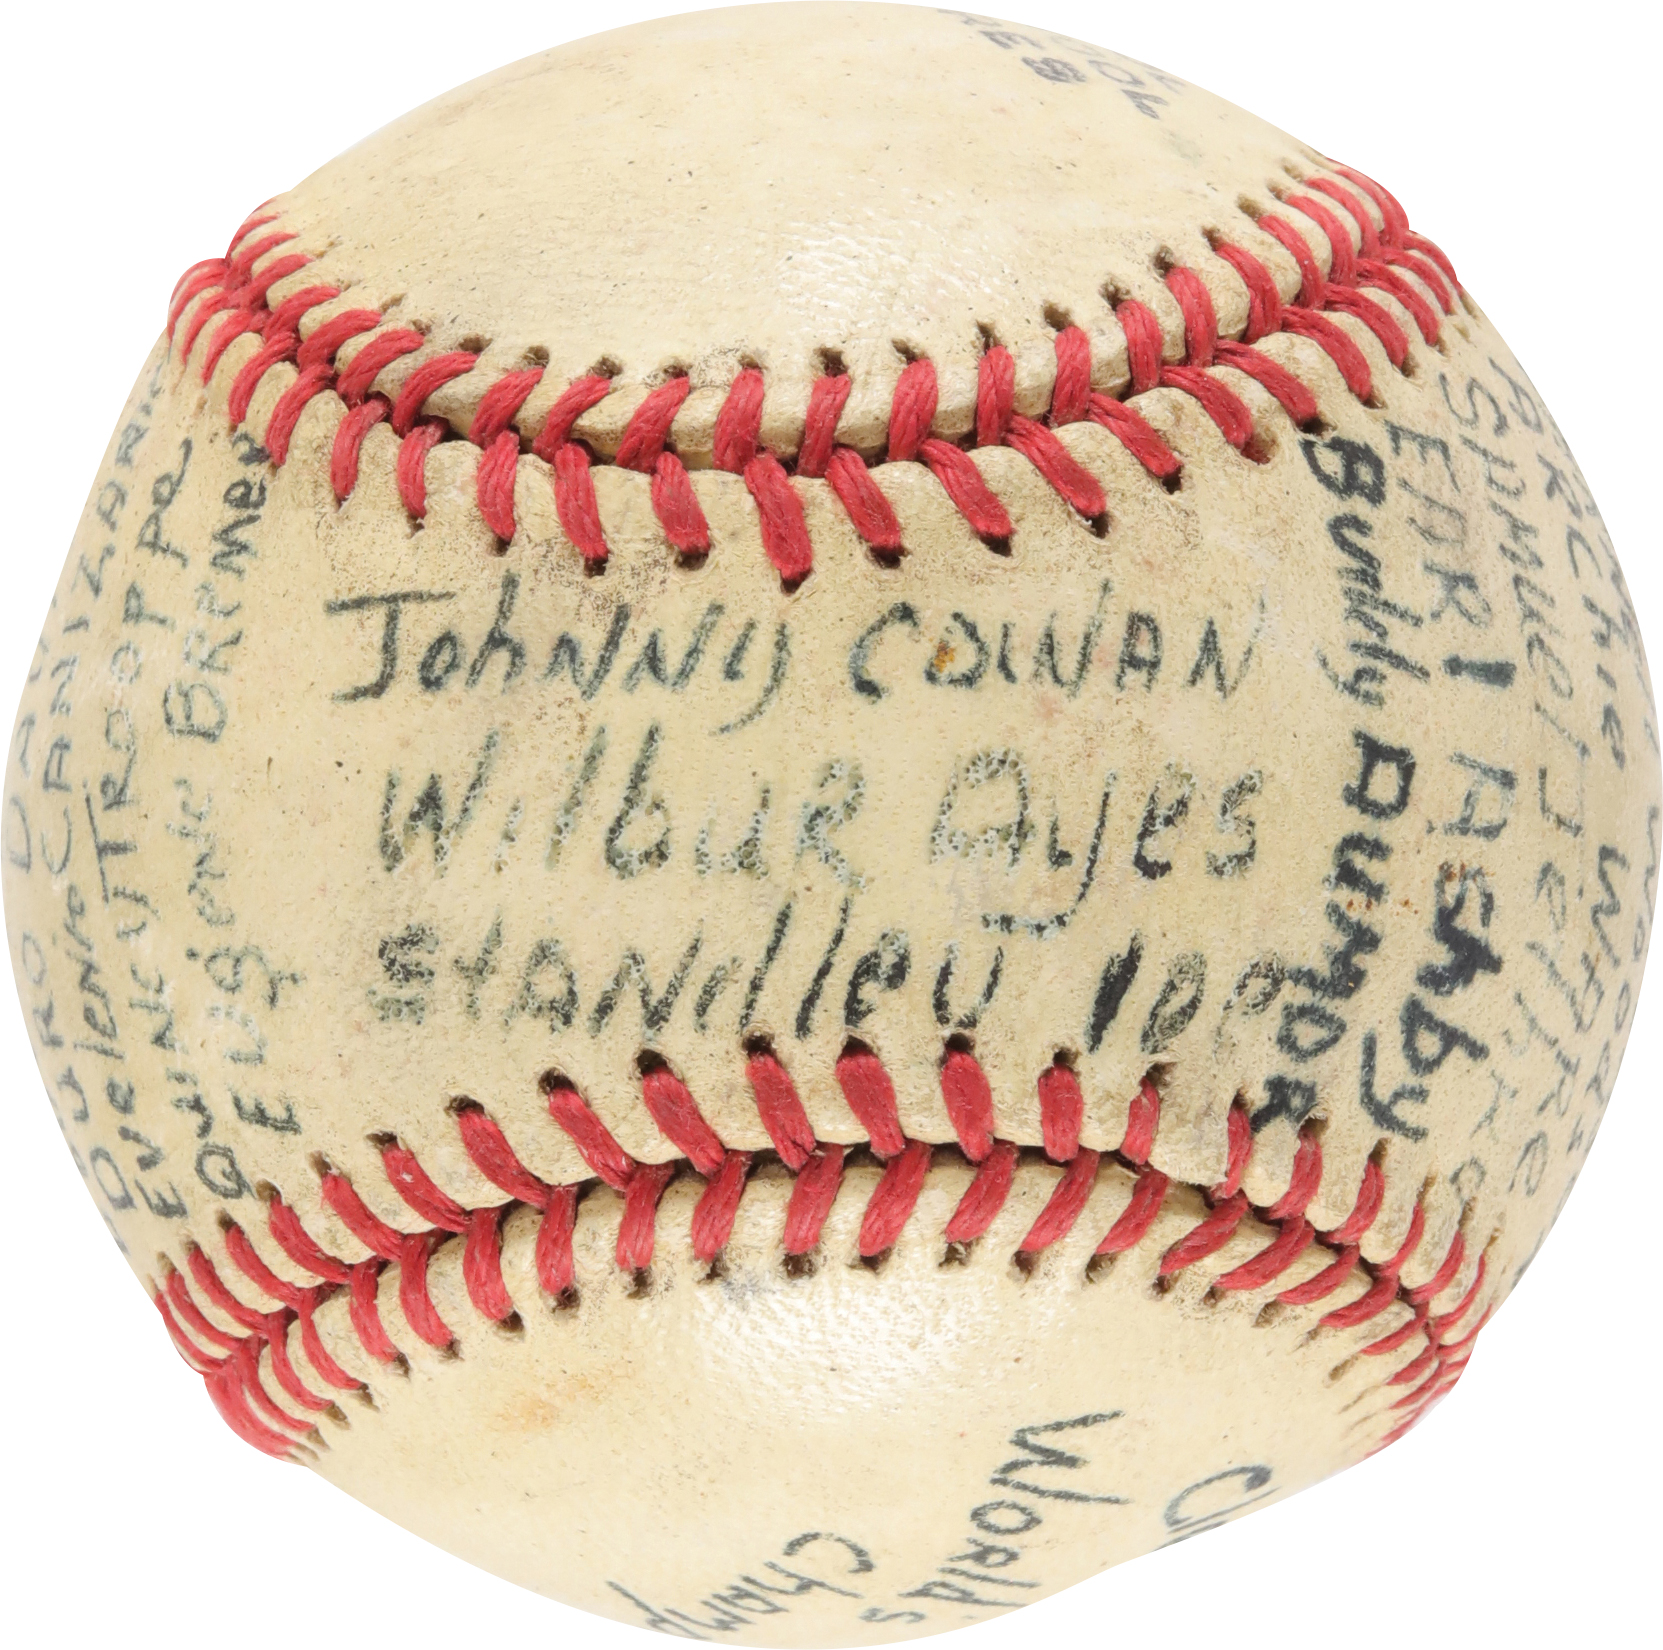 Baseball memorabilia from 1862 at auction in Maine